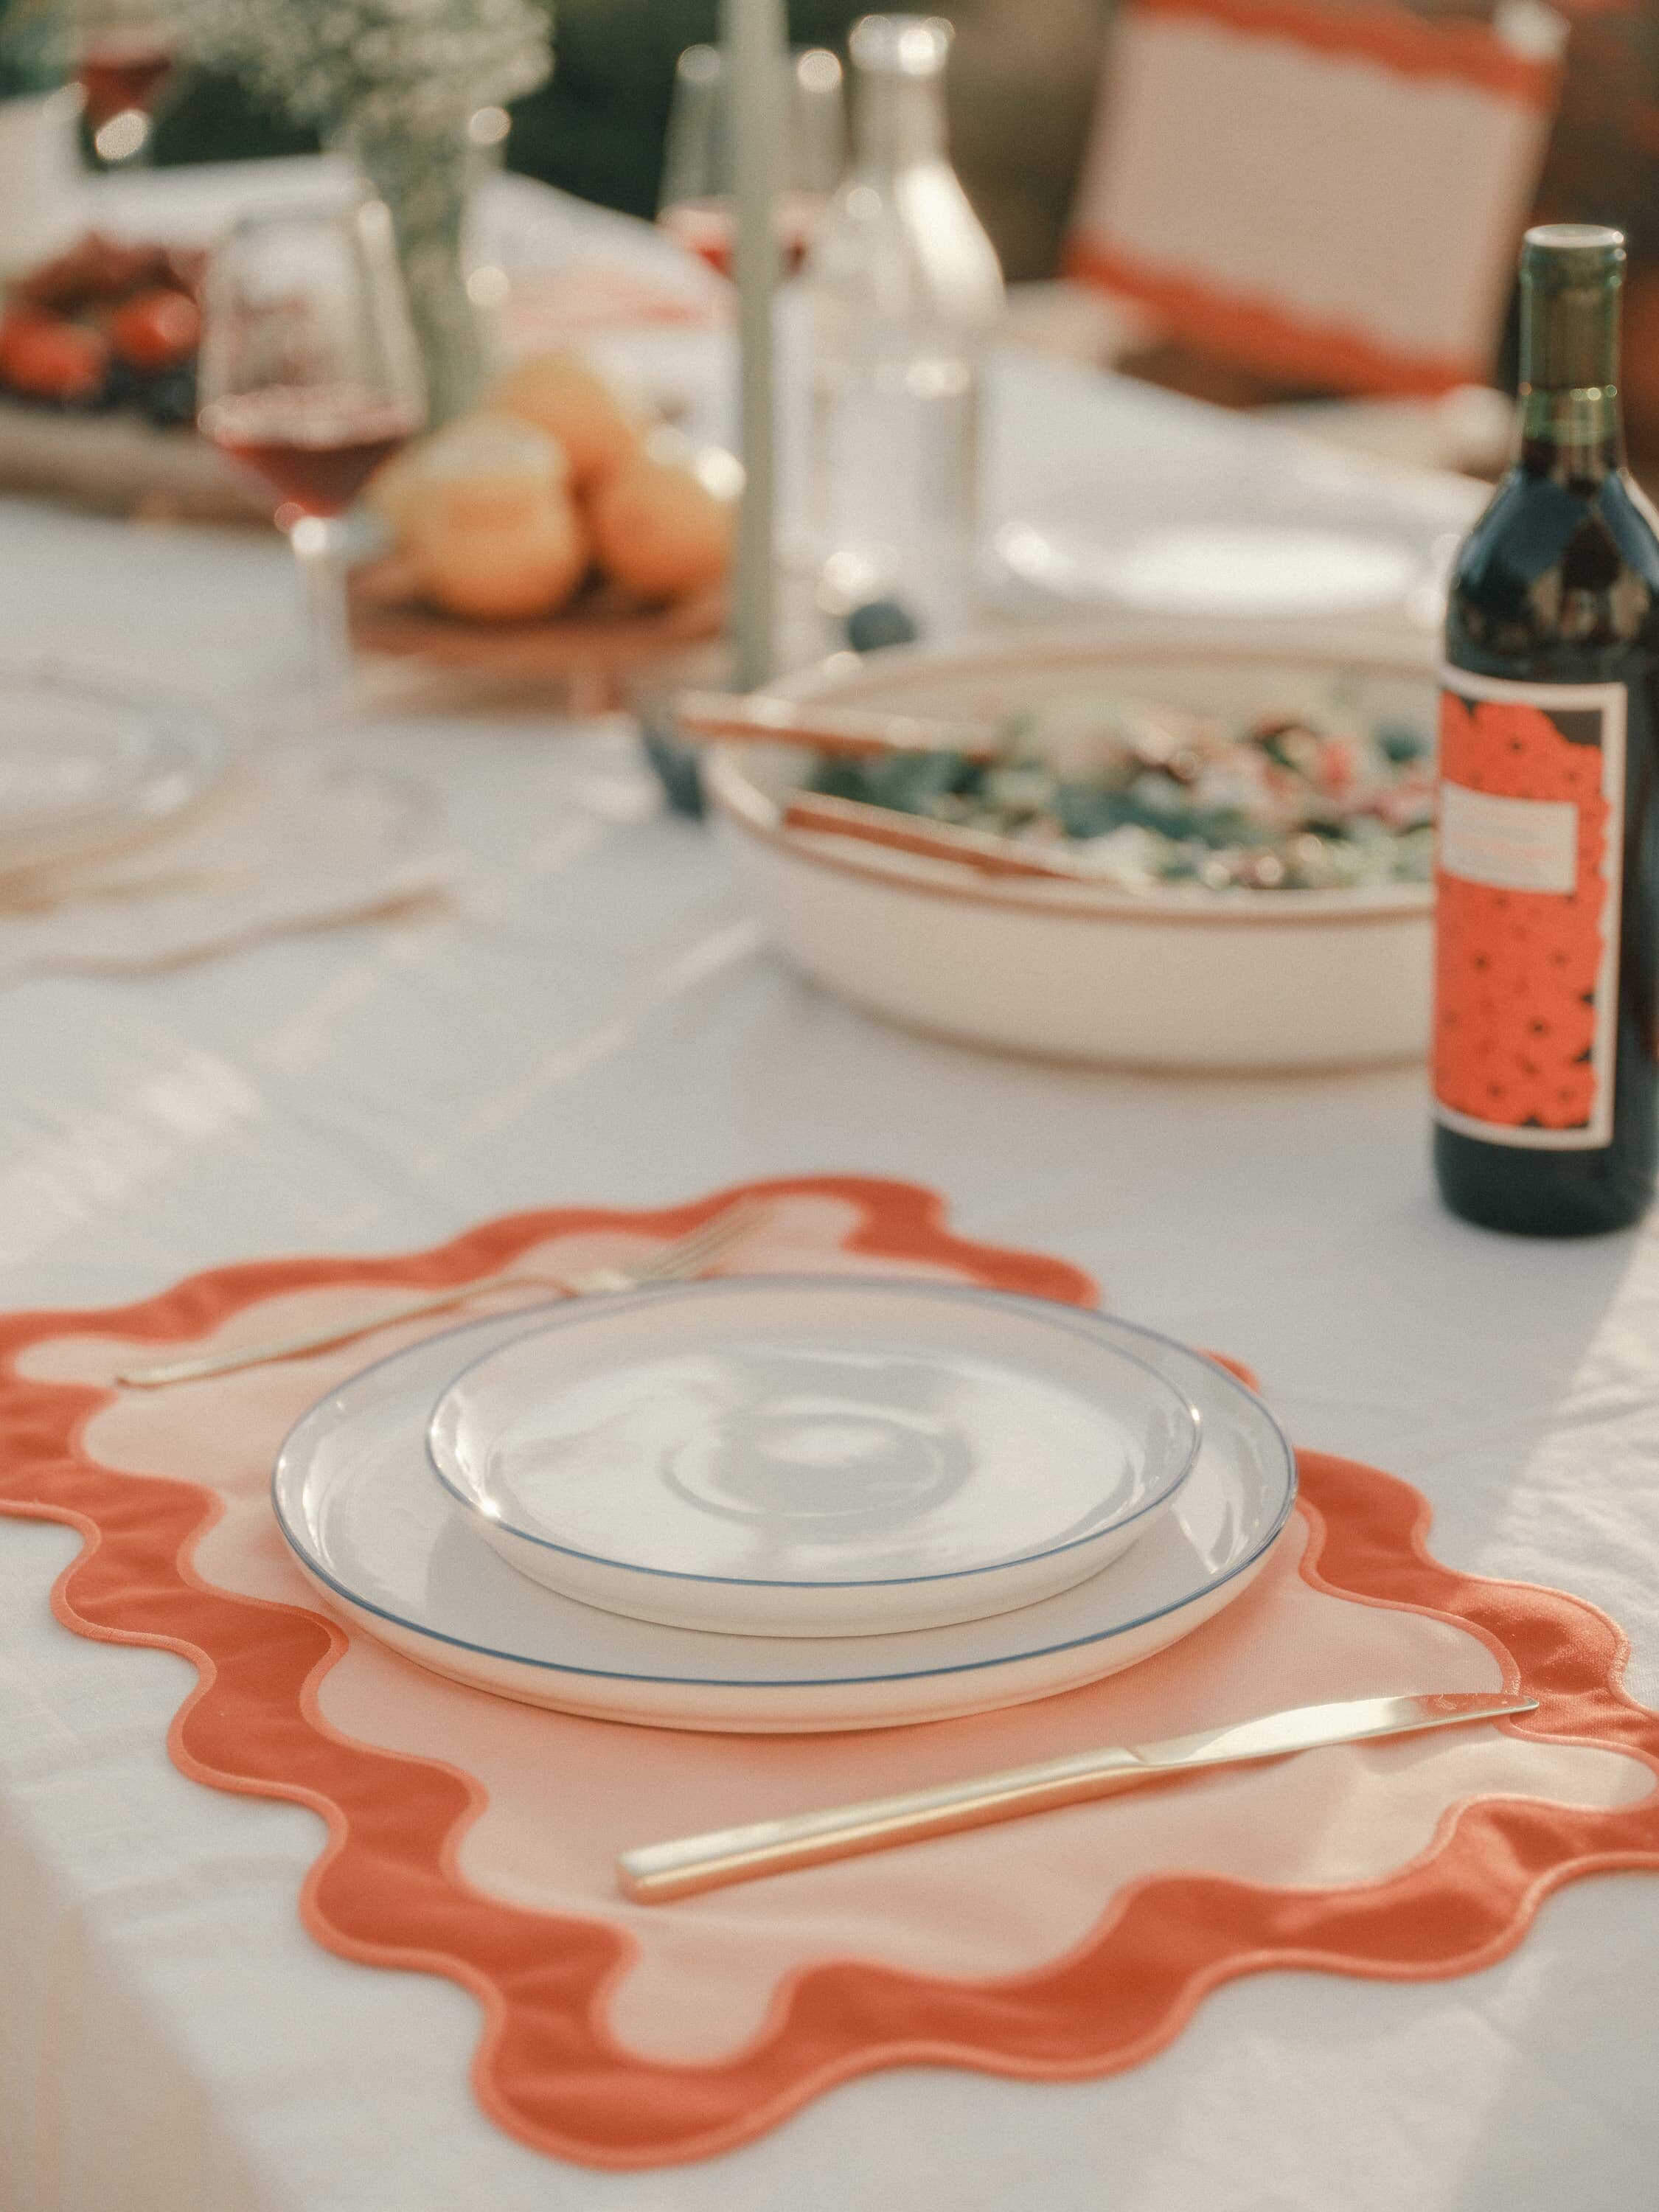 table setting with table cloth and placemat